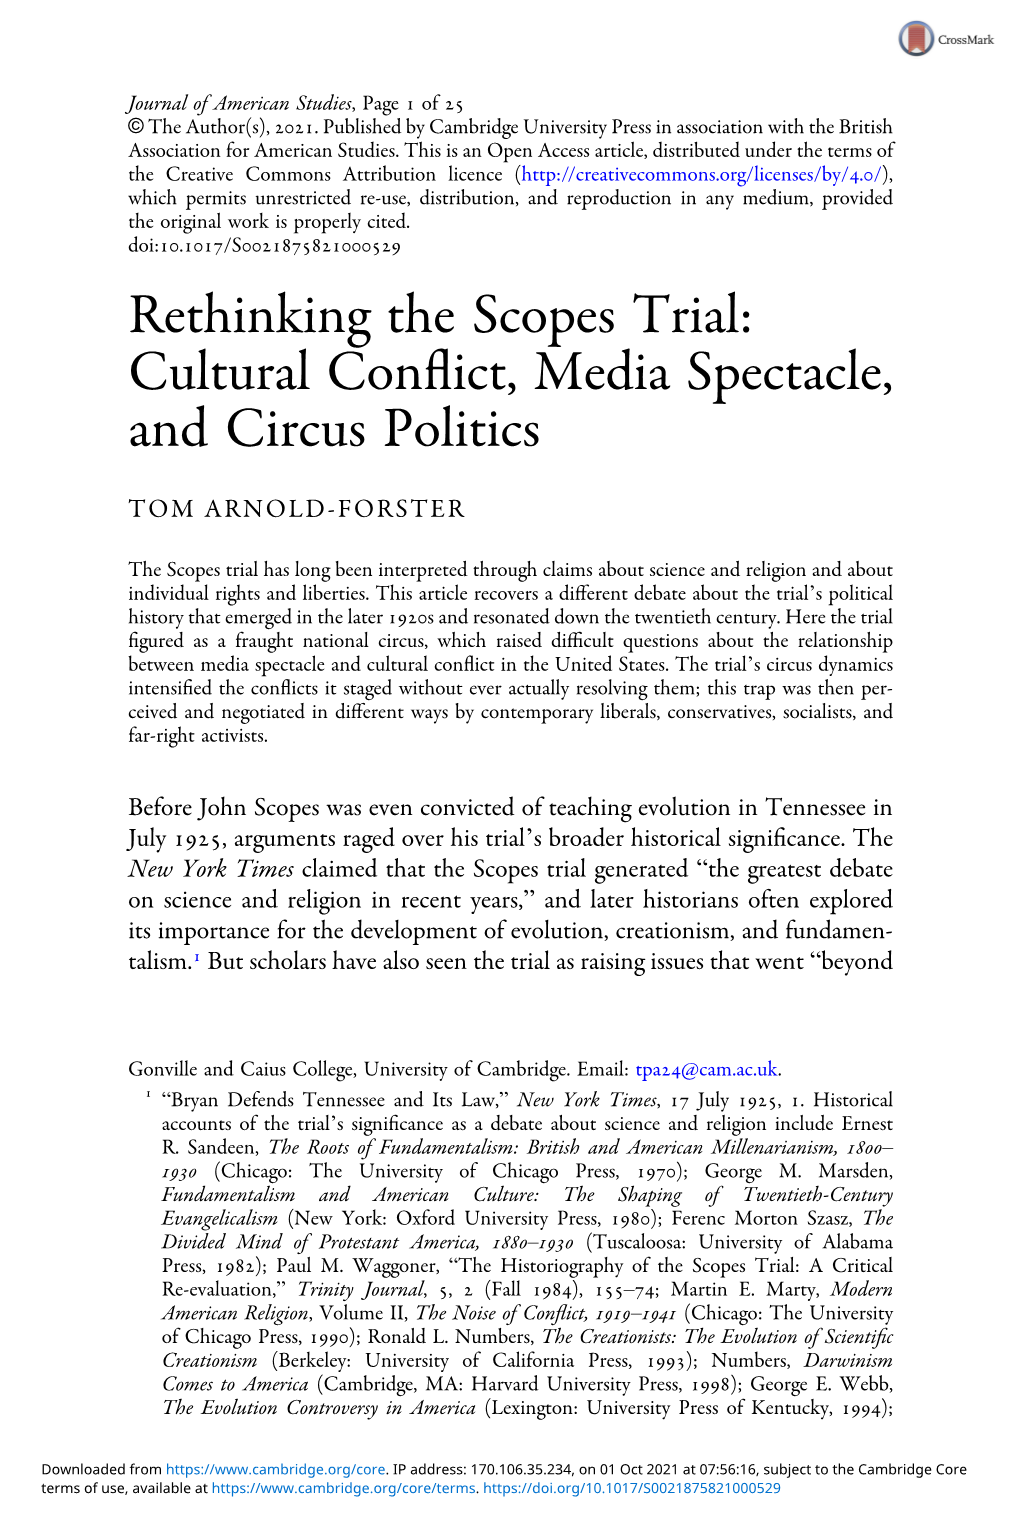 Rethinking the Scopes Trial: Cultural Conflict, Media Spectacle, and Circus Politics